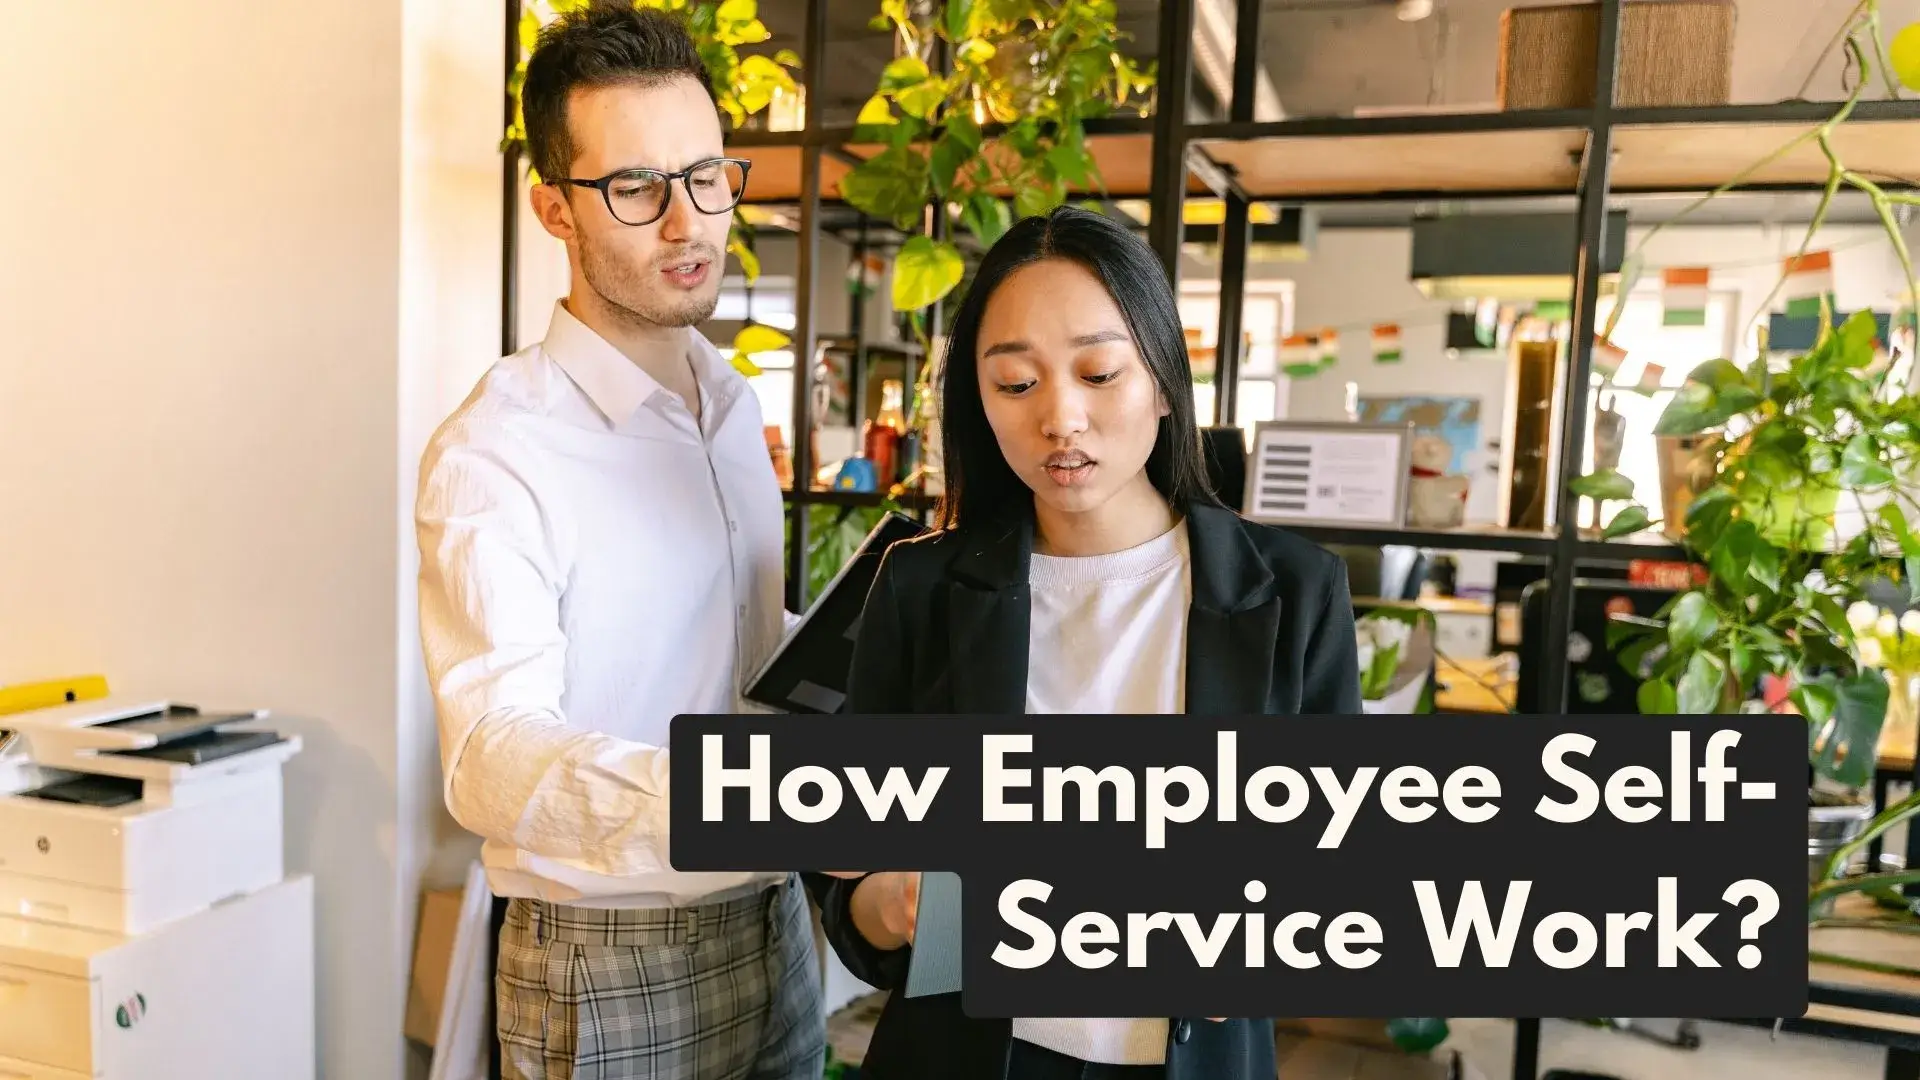 How Employee Self-Service Work With Case Studies? By Store-Hour.Com or Store-Hour